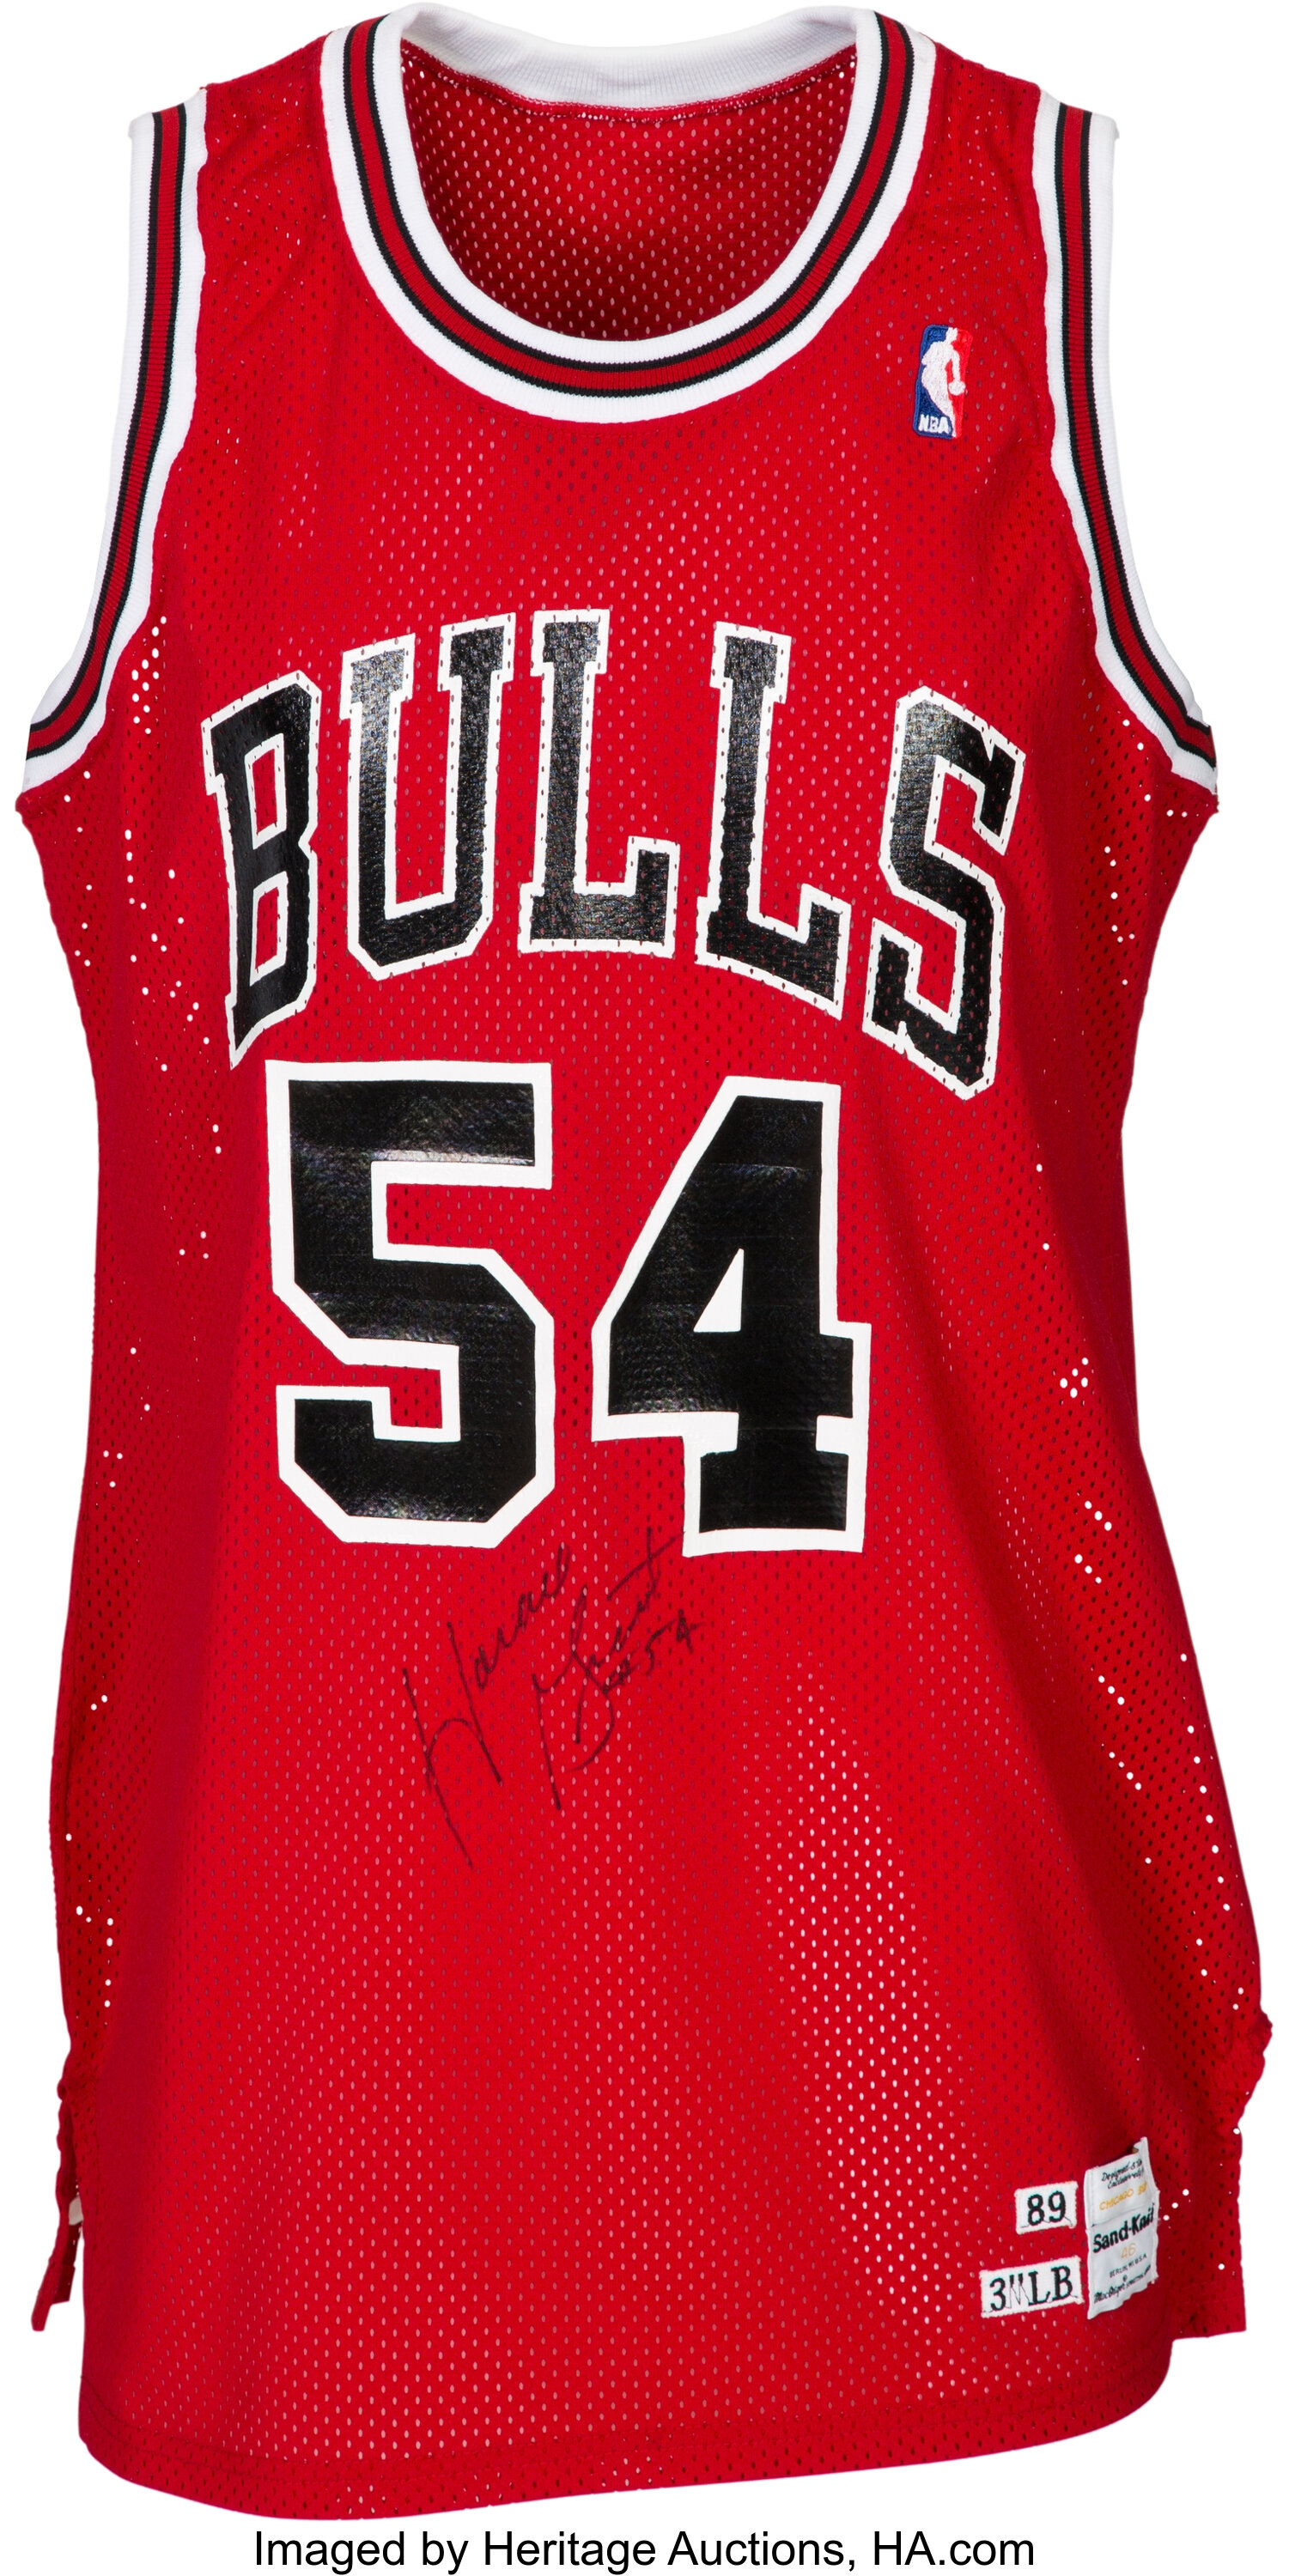 The World Exclusive Chicago Bulls 'Horace Grant' #54 Hardwood Classic Jersey  from Mitchell and Ness has released earlier this week. ⁠ ⁠ Cop…